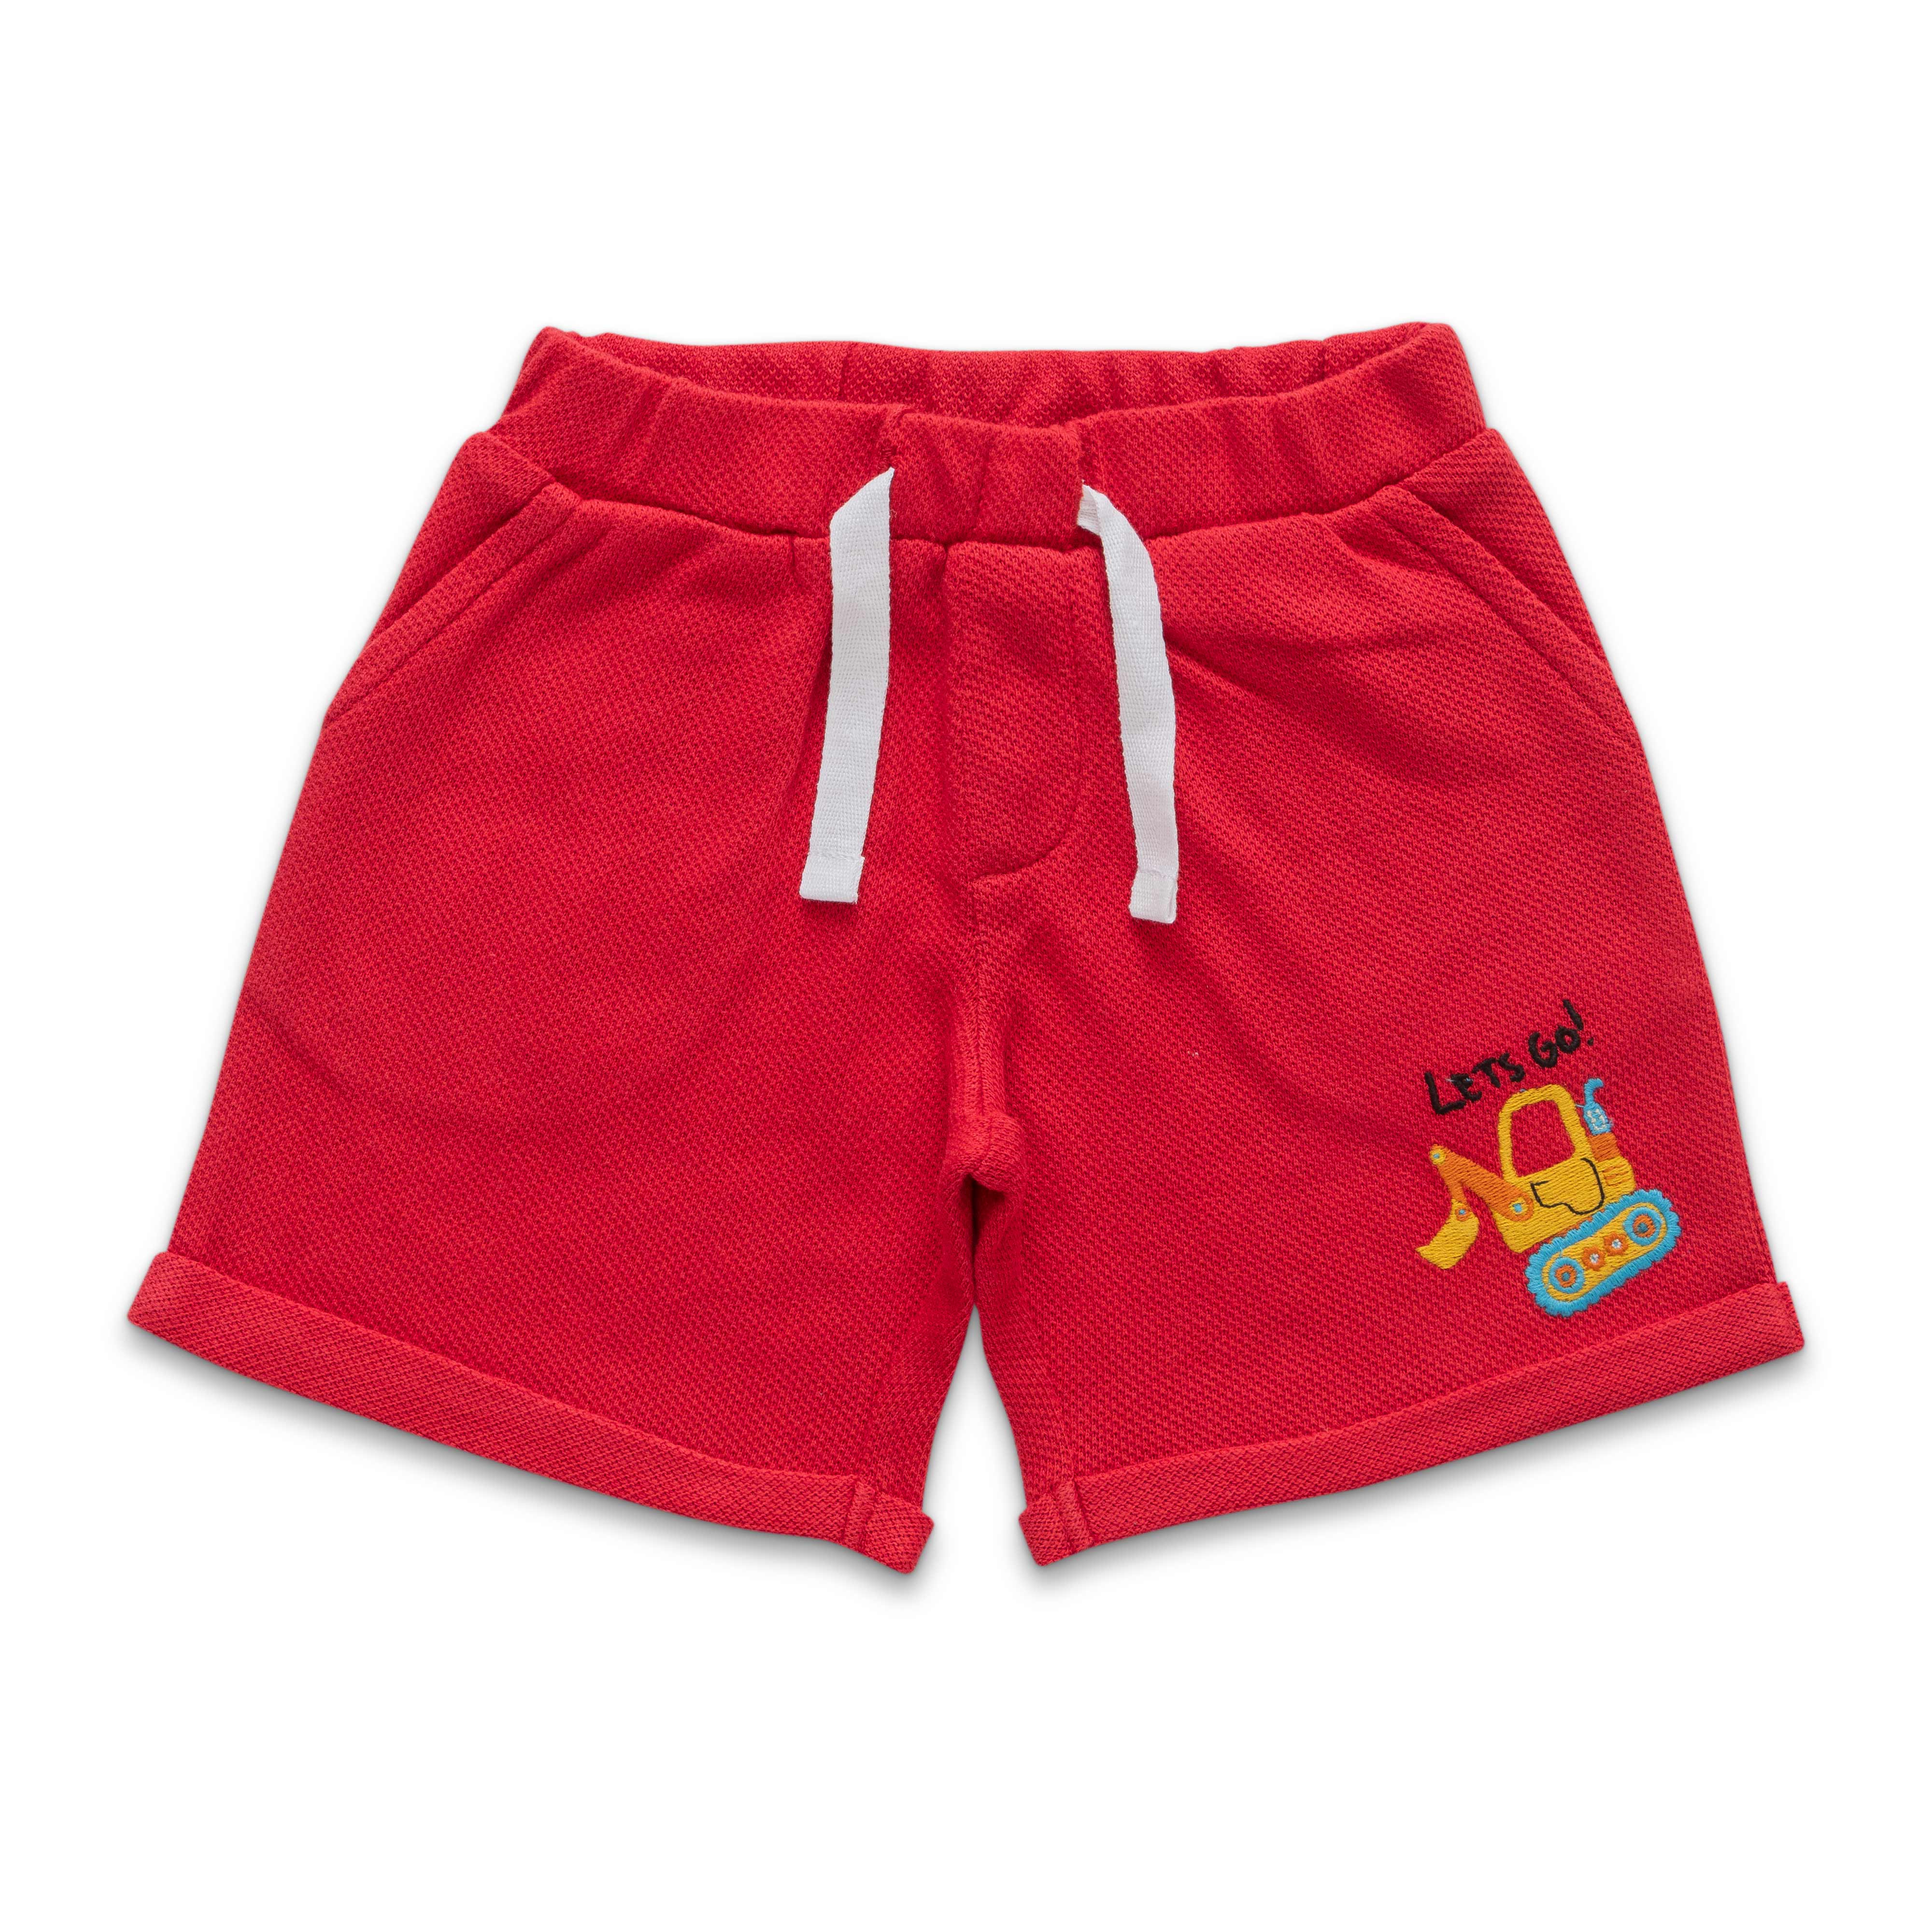 Infant Boys Striped Pure Cotton T-shirt with Shorts- Red